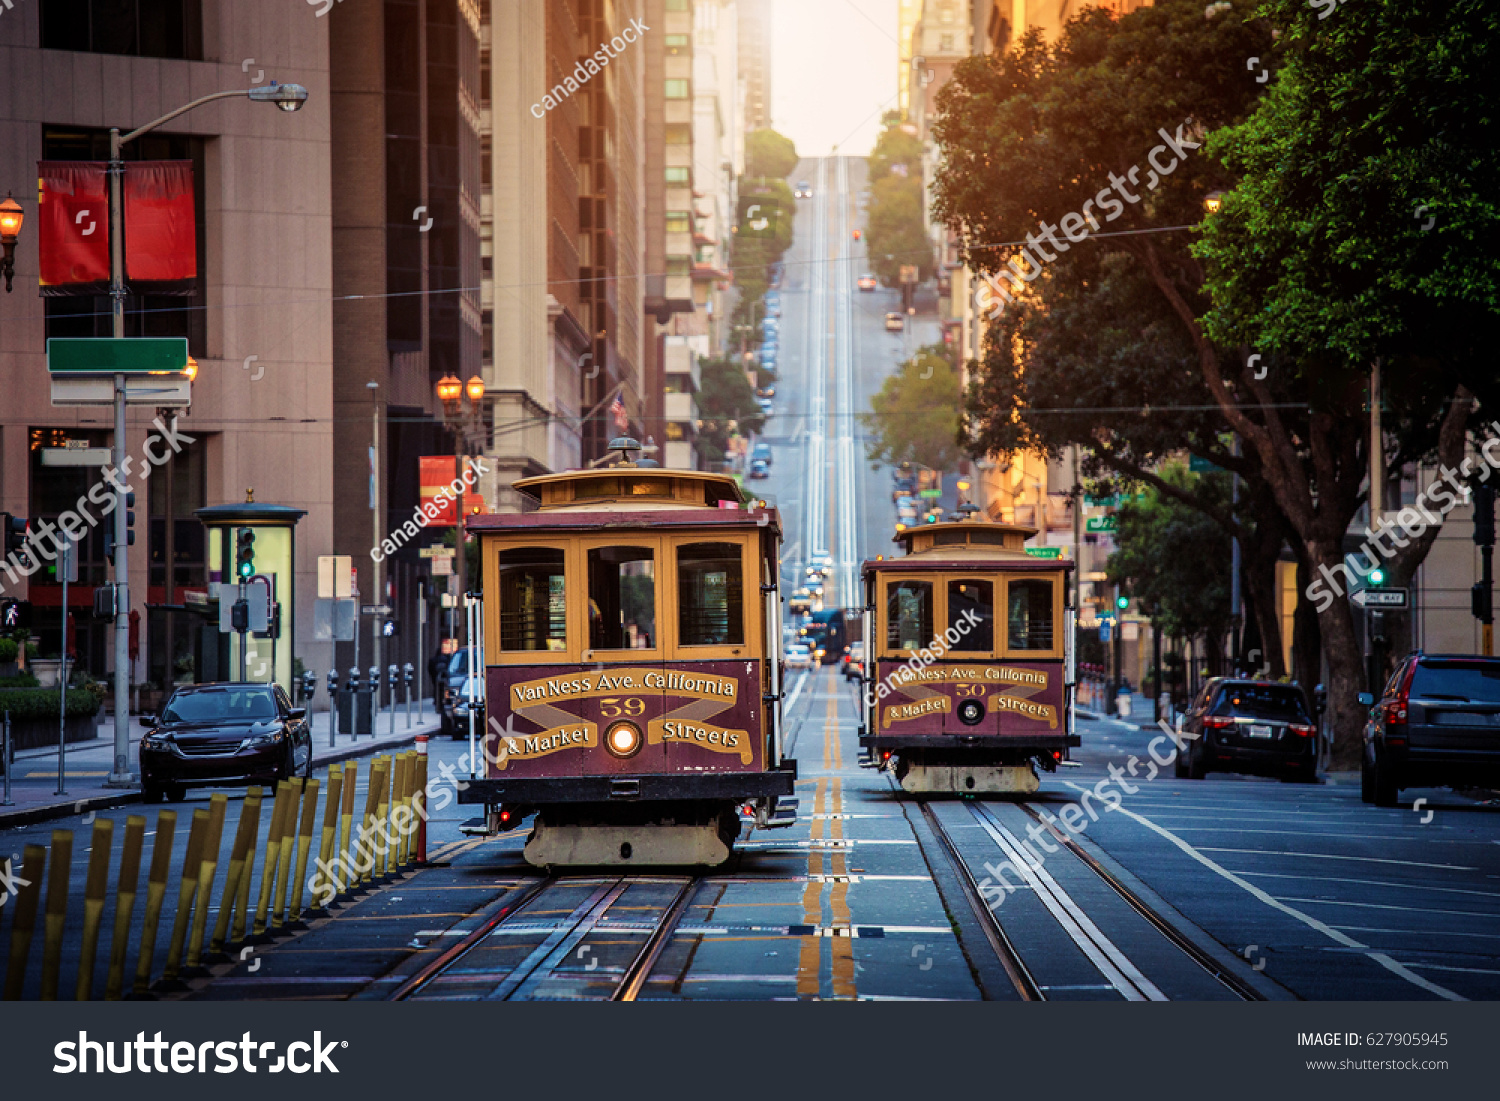 Classic view of historic traditional Cable Cars riding on famous California Street in morning light at sunrise with retro vintage style cross processing filter effect, San Francisco, California, USA #627905945